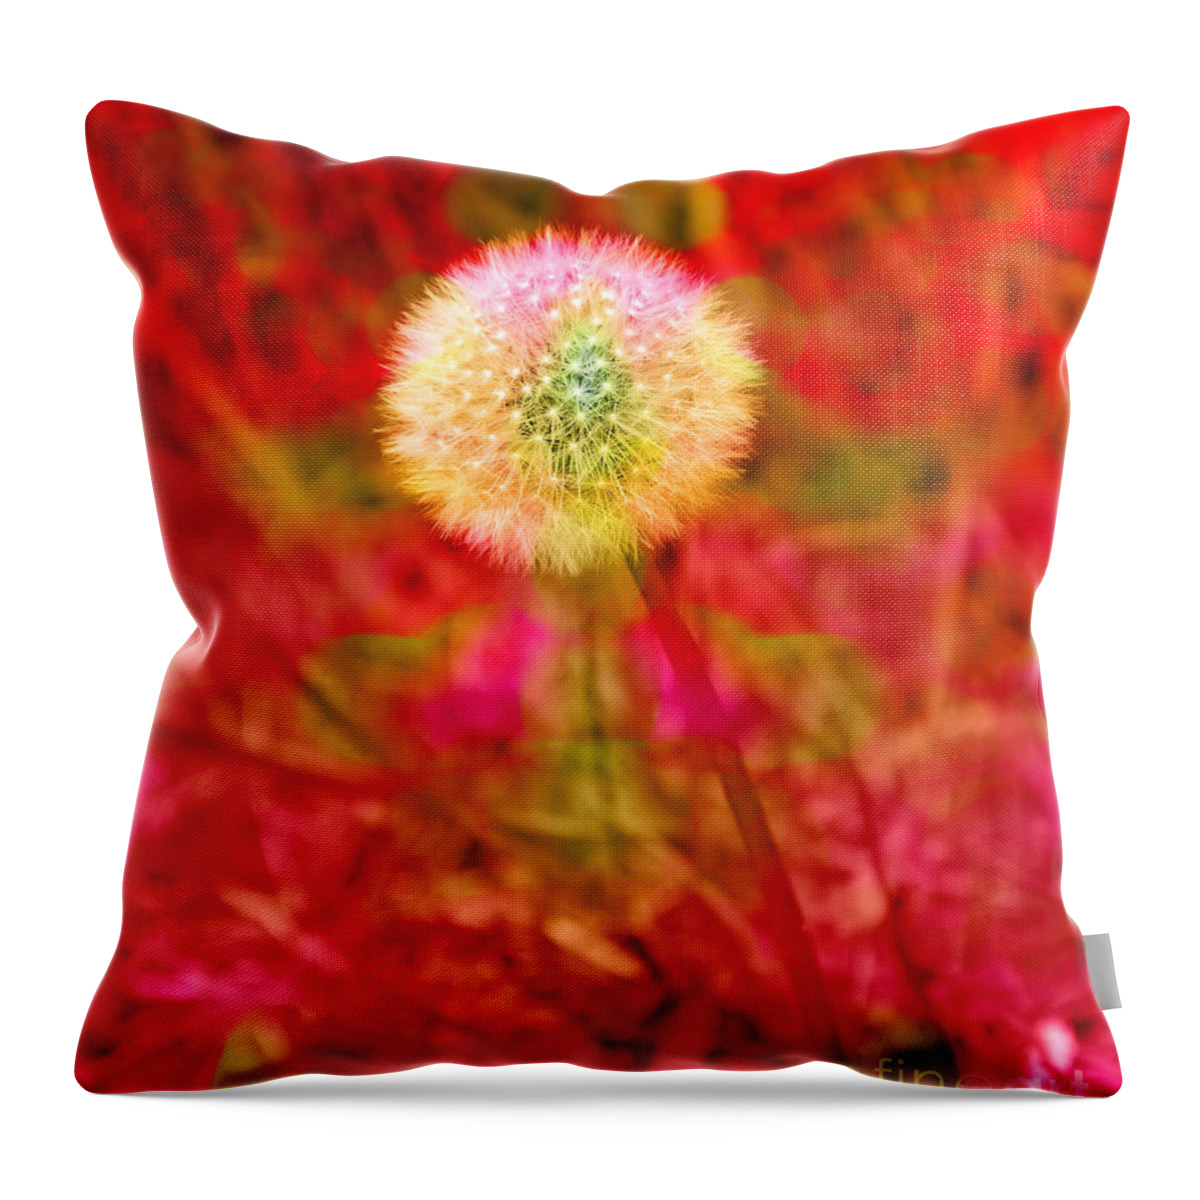 Andee Design Dandelion Art Throw Pillow featuring the photograph I Feel Pretty 1 by Andee Design